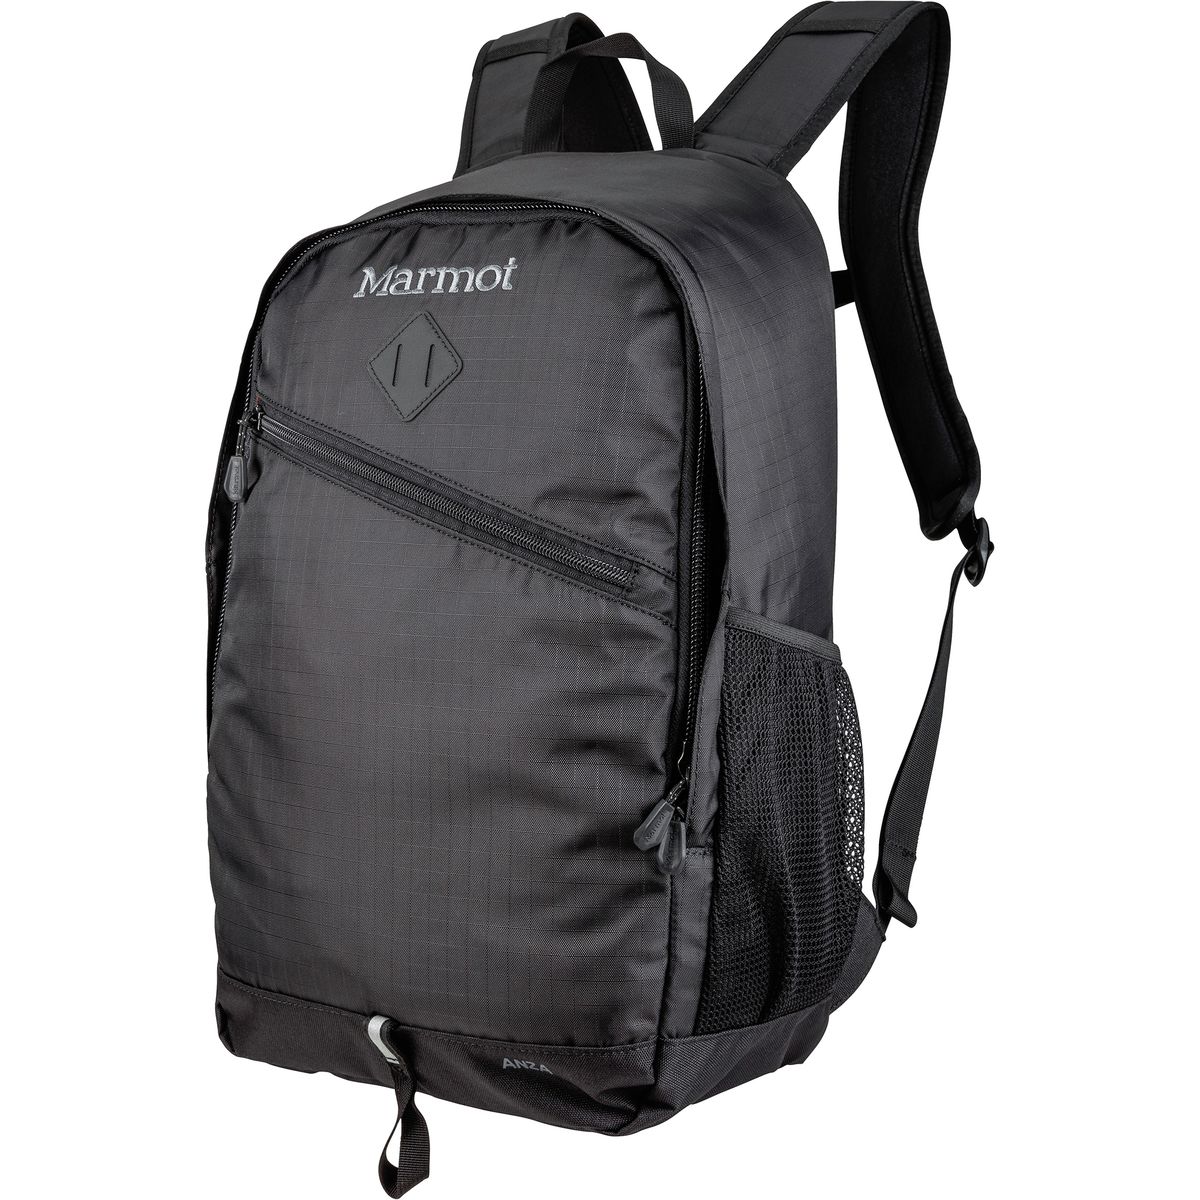 Marmot Anza 22L Backpack Black One Size